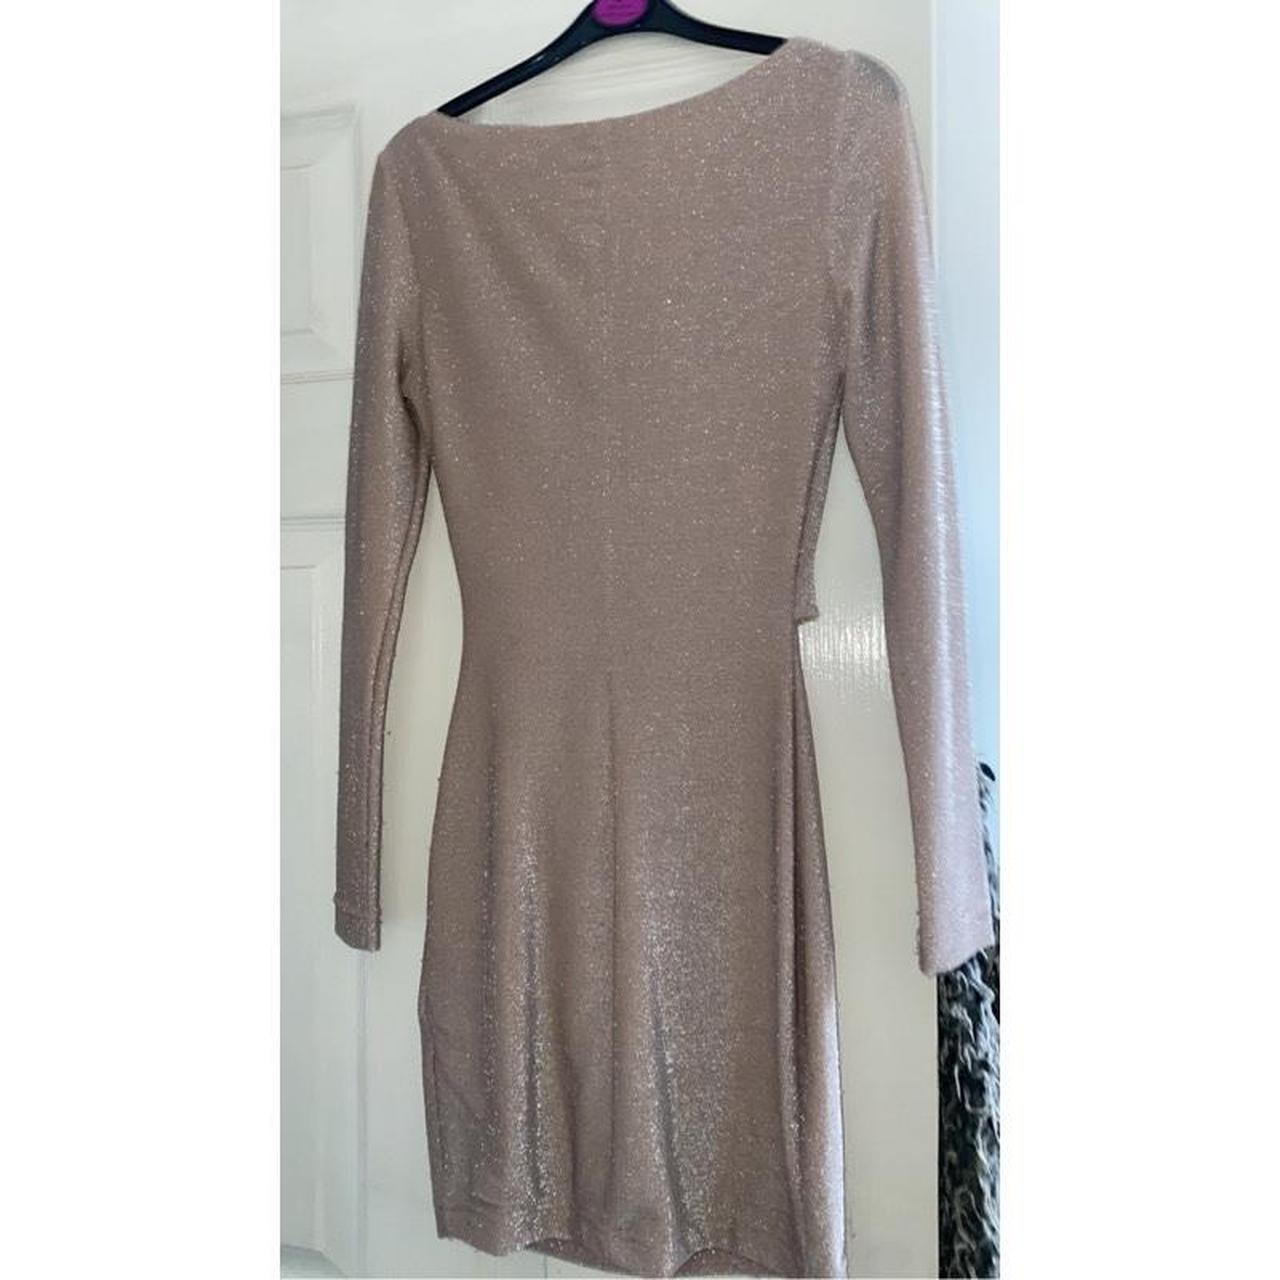 Oh Polly pink glitter dress Size 8 Worn once - Depop